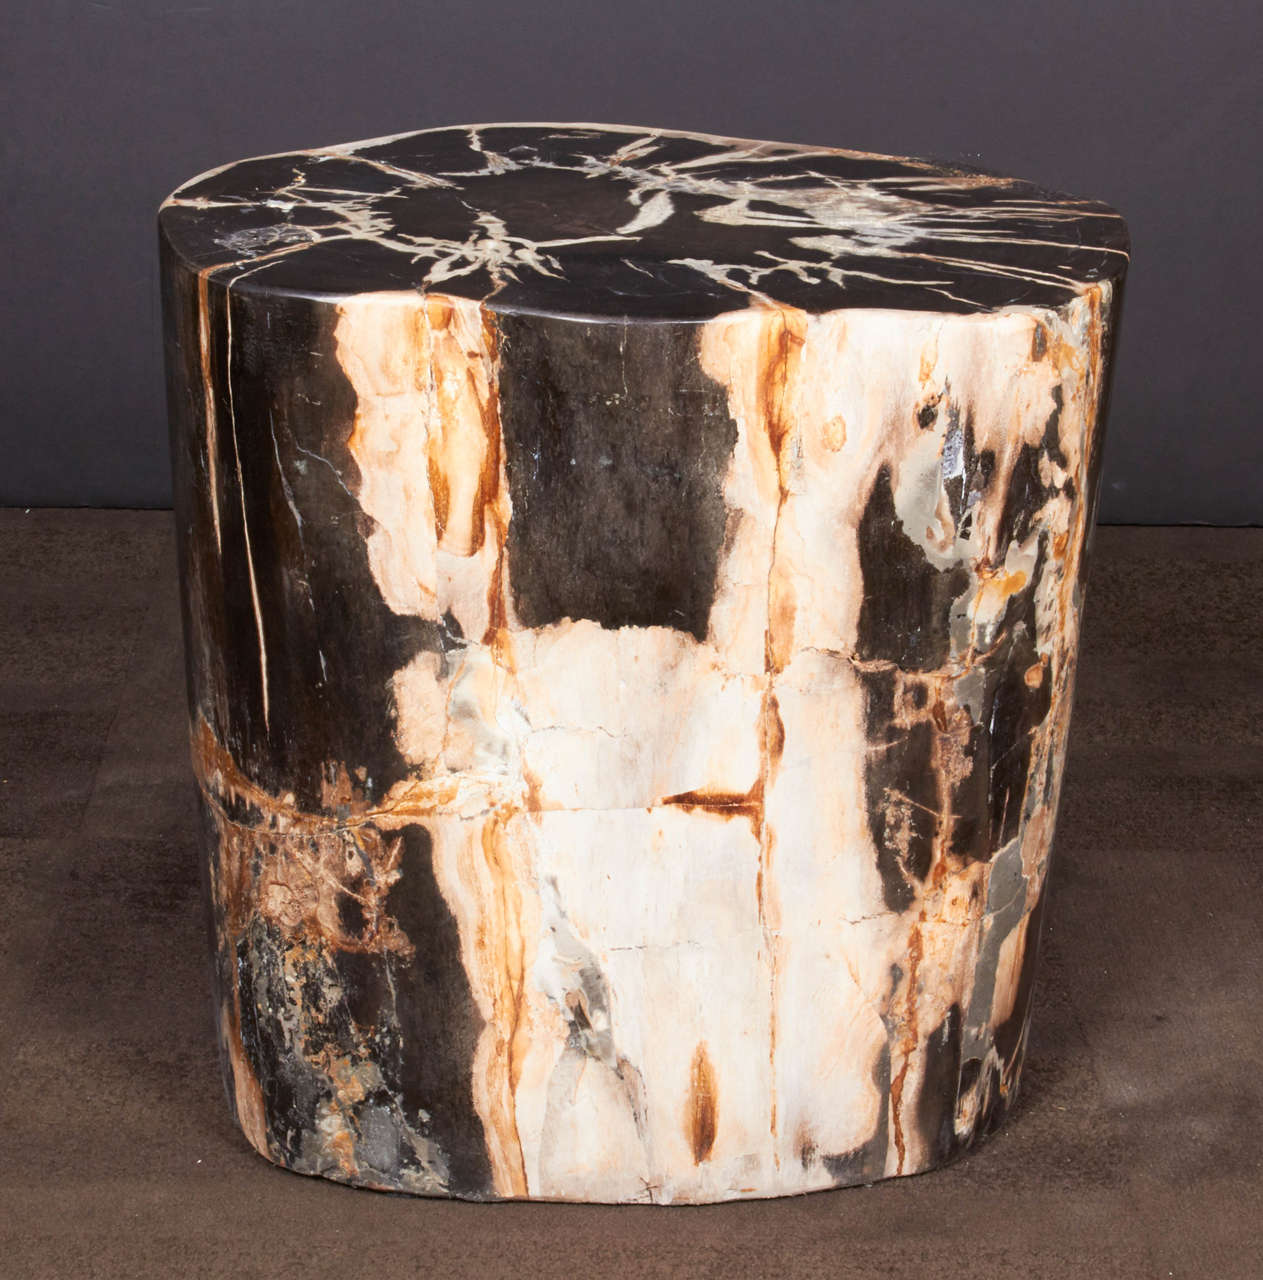 Remarkable example of wood petrification, naturally fossilized throughout hundreds of years. Outstanding quality, has been hand-cut and polished and can double as a stool or seating. The beauty of petrified wood is the rarity and originality of each